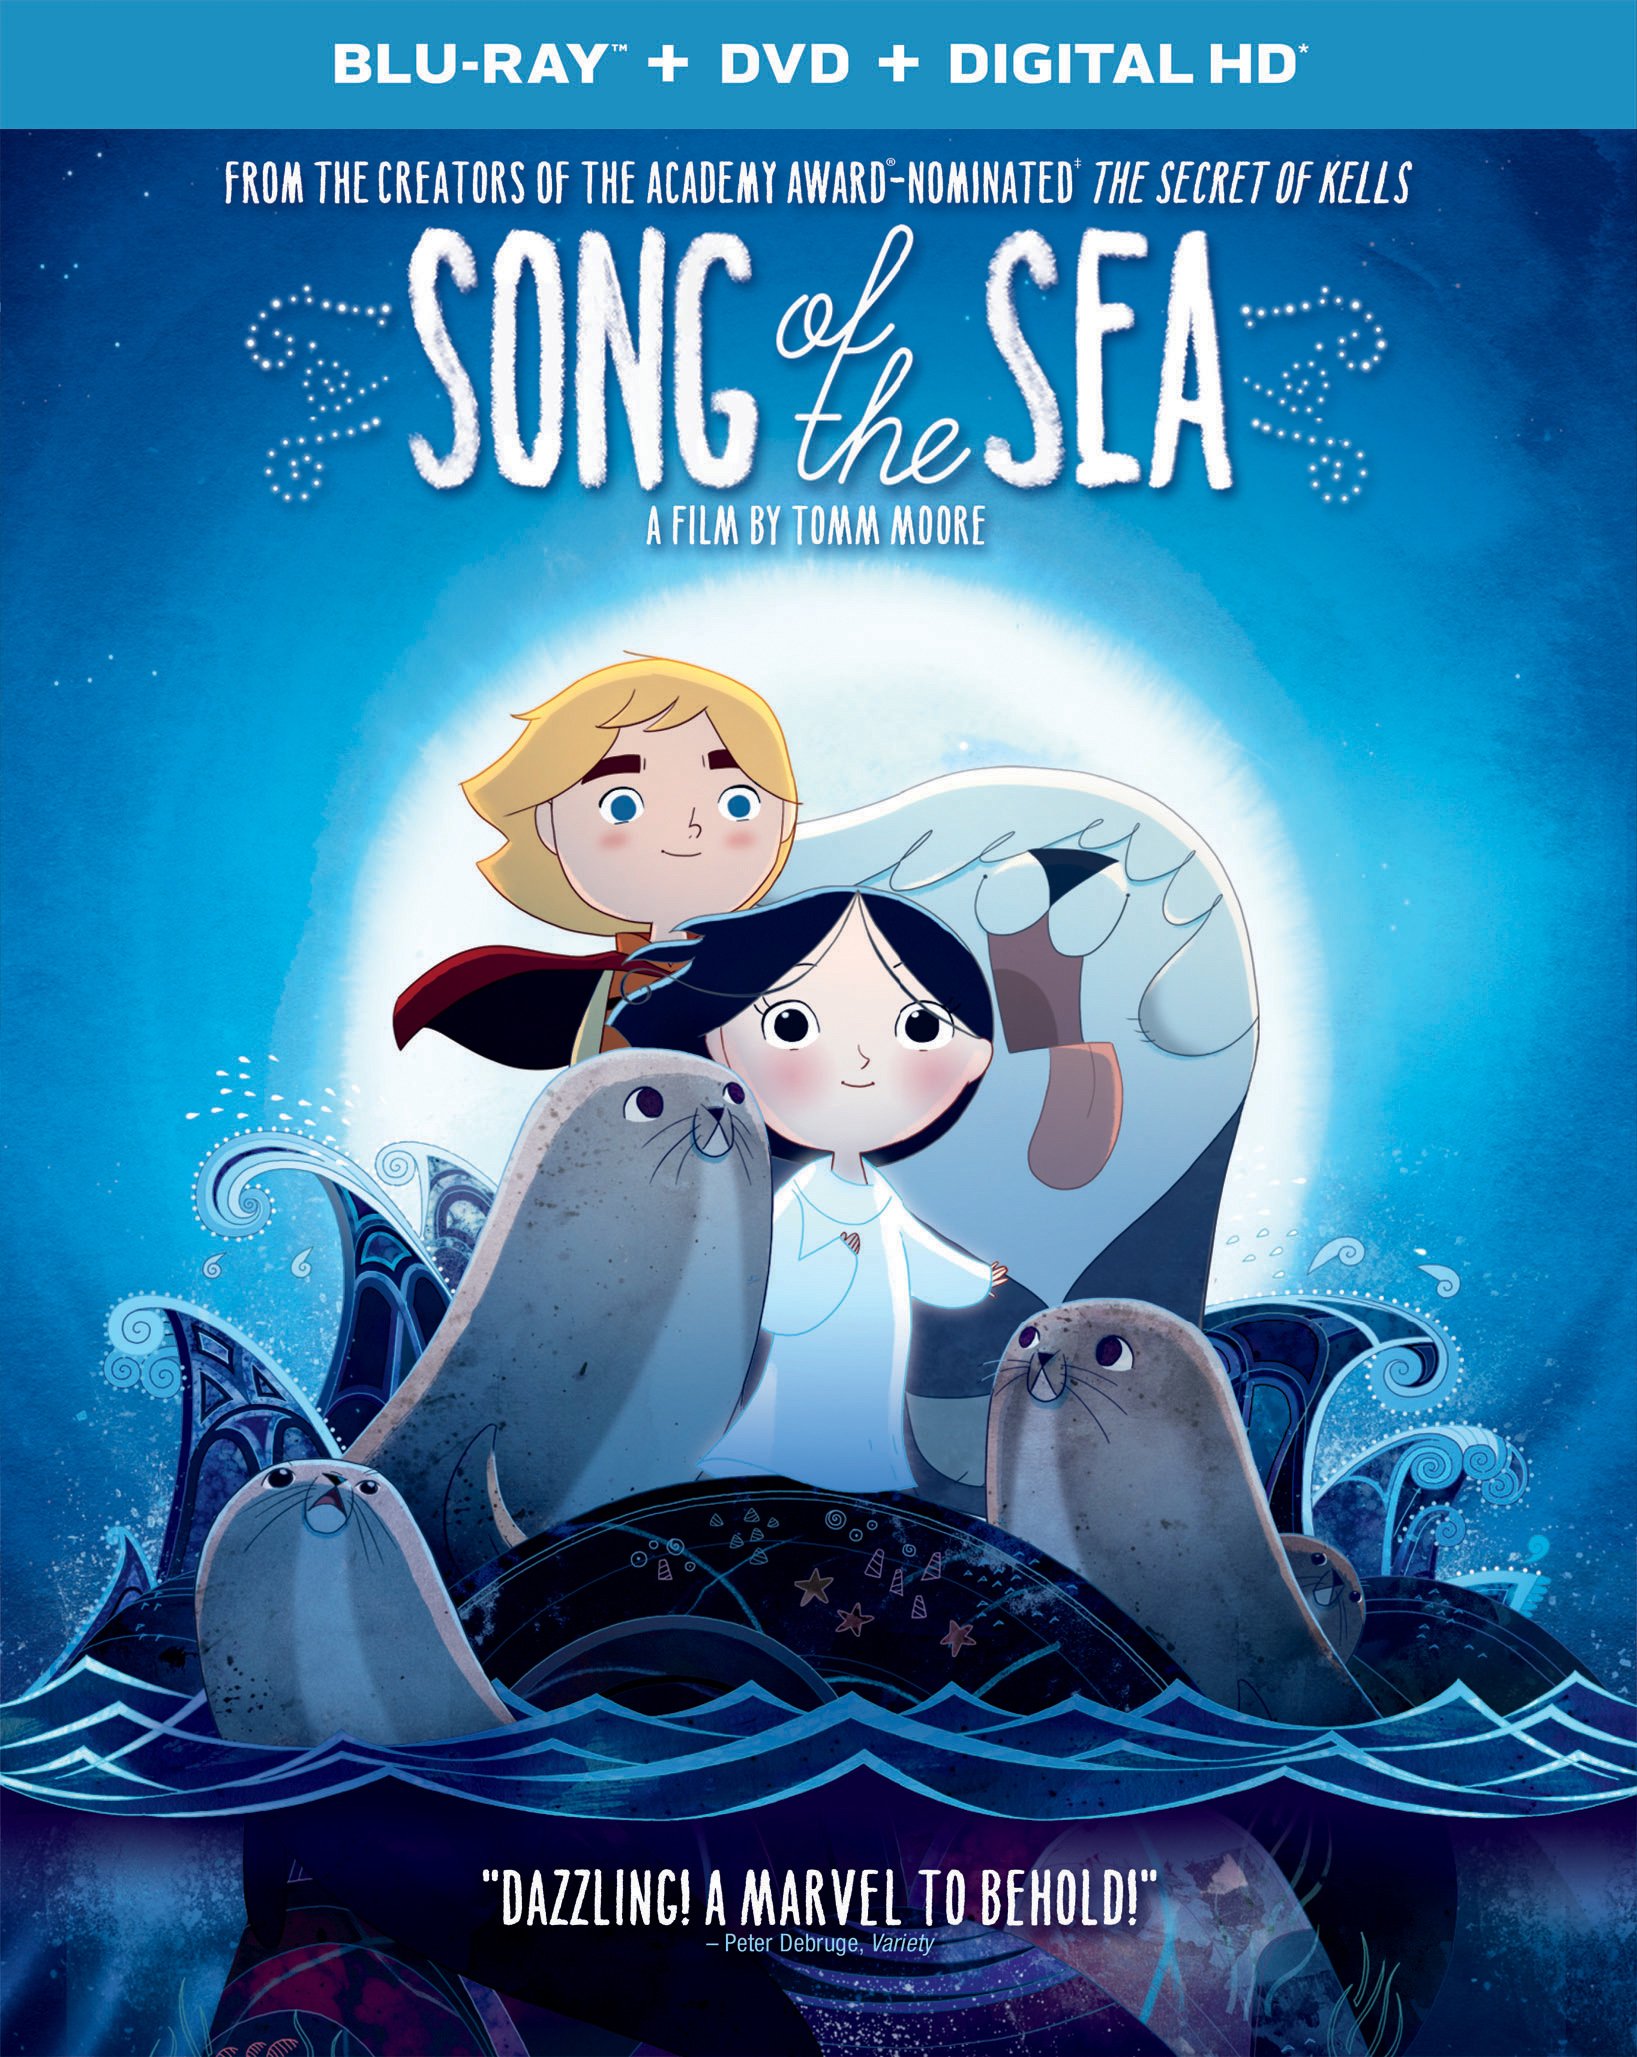 Song of the Sea DVD Release Date March 17, 2015